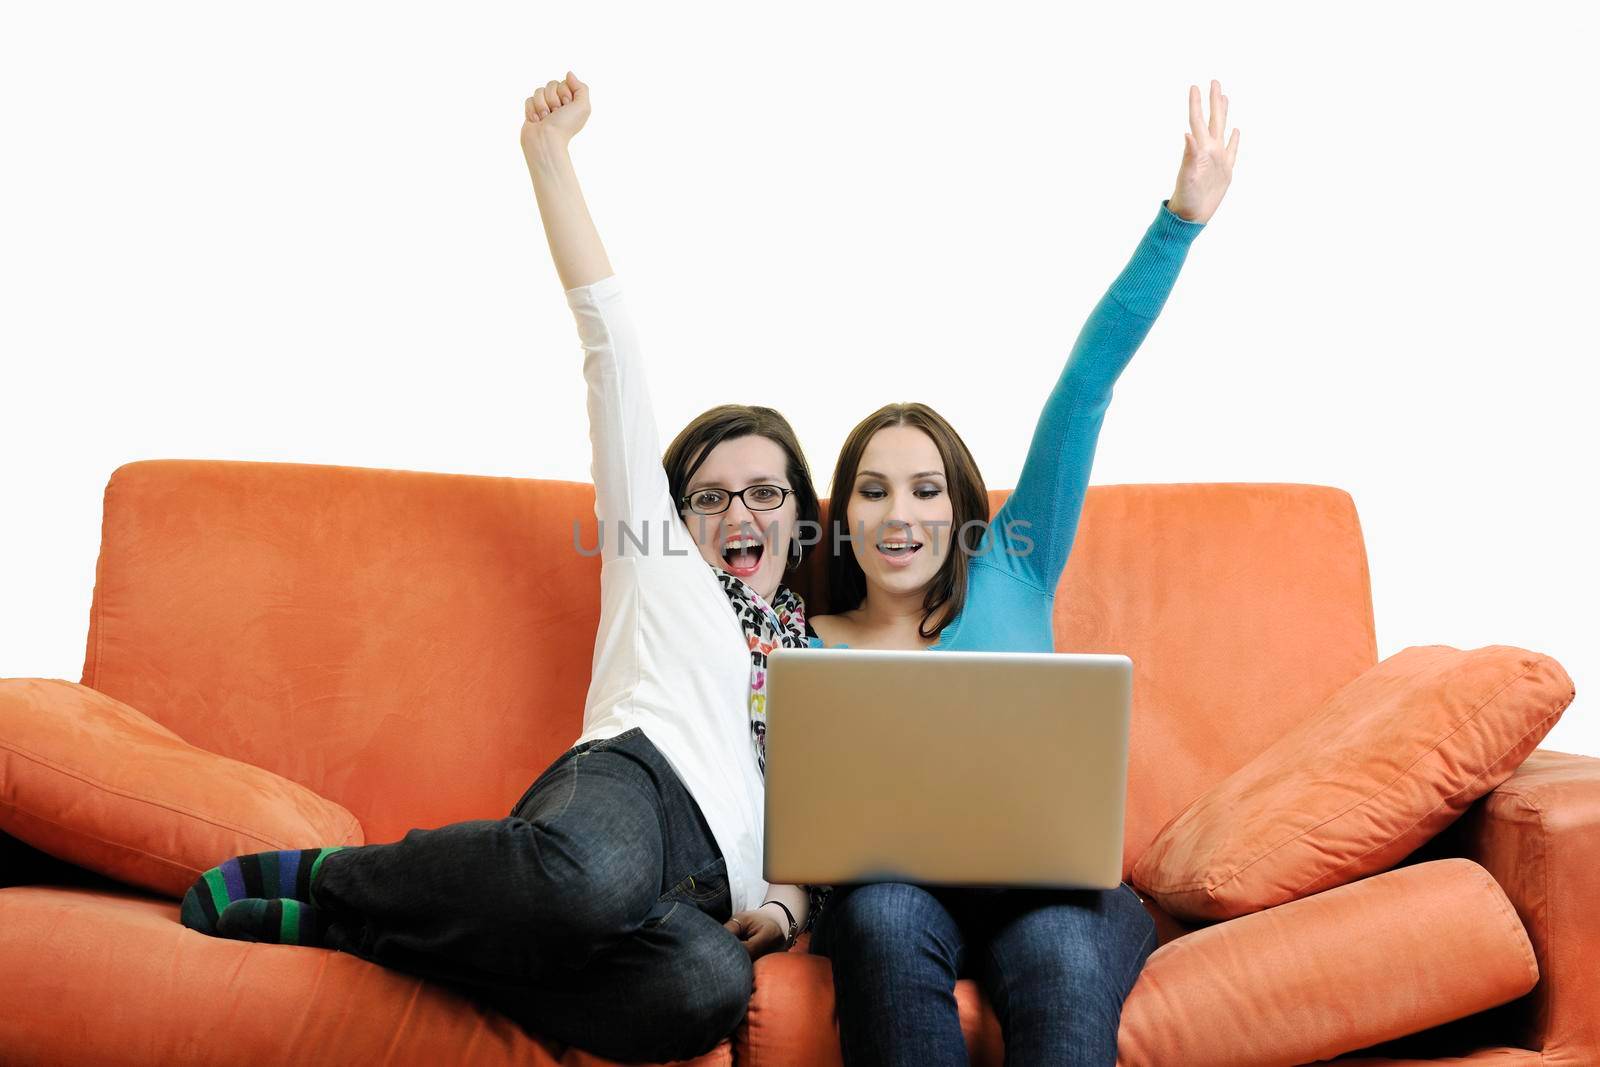 two happy young woman working on laptop computer on red sofa isolated on white